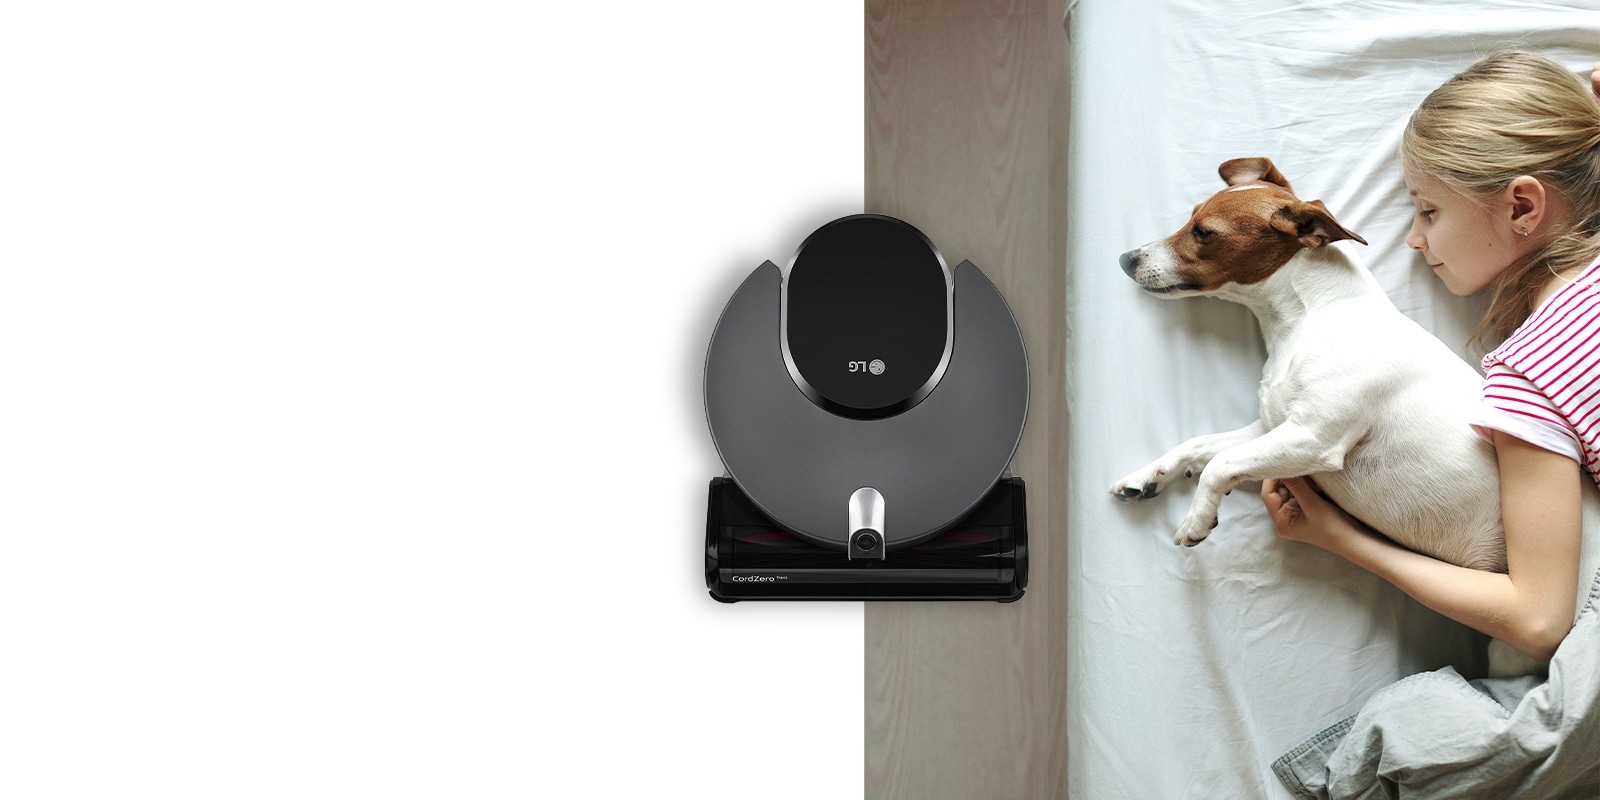 Quiet robot vacuum cleaning next to sleeping child and dog